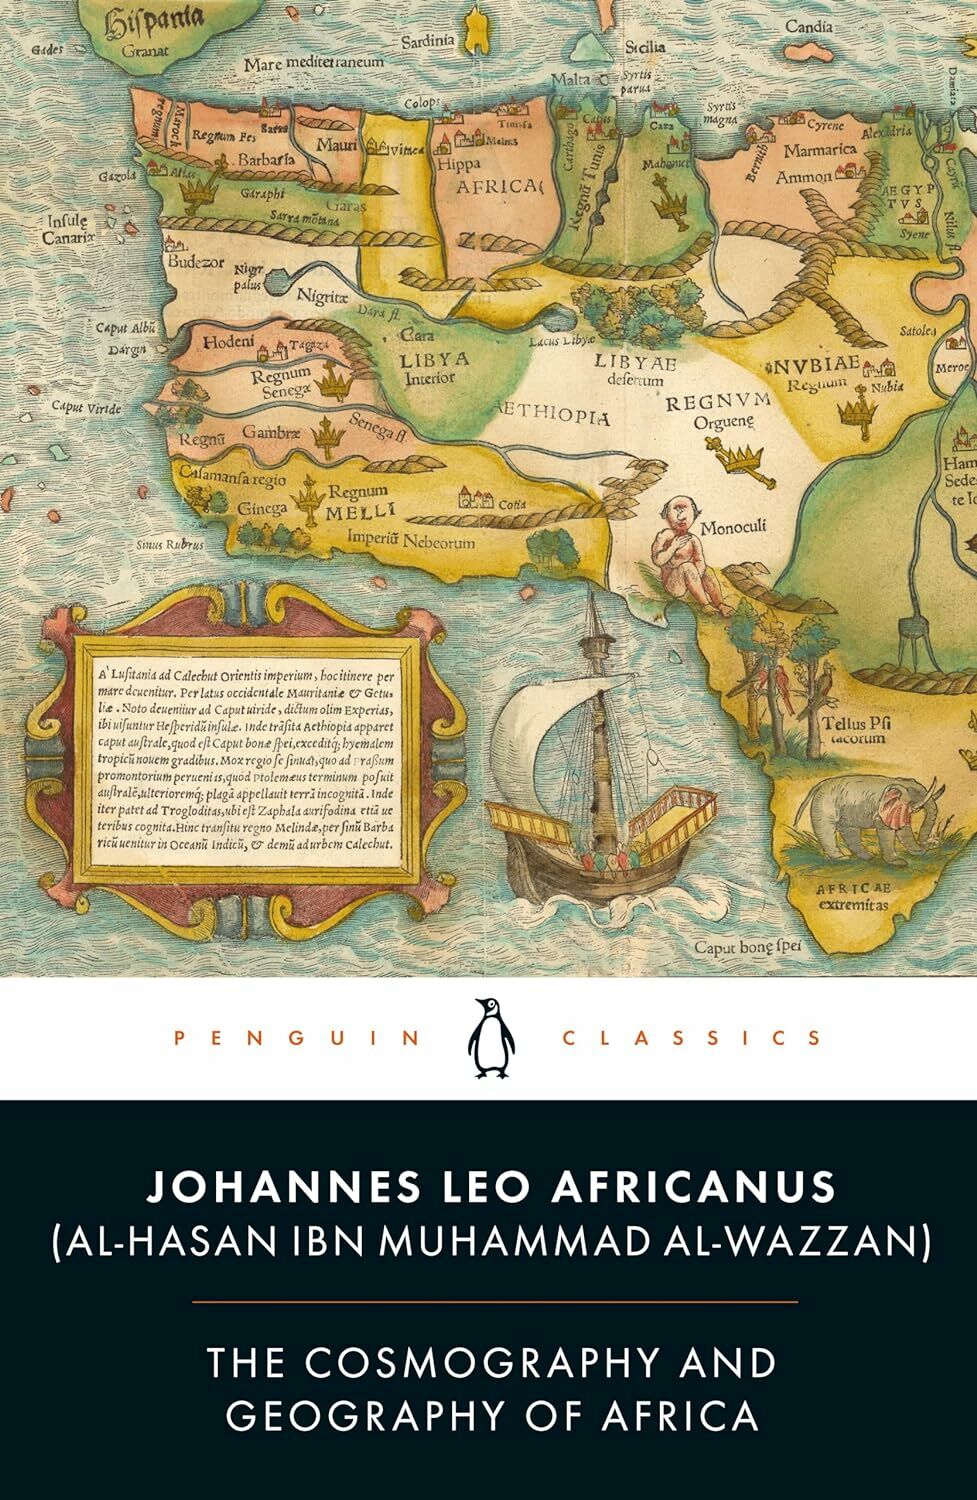 Cosmography and Geography of Africa